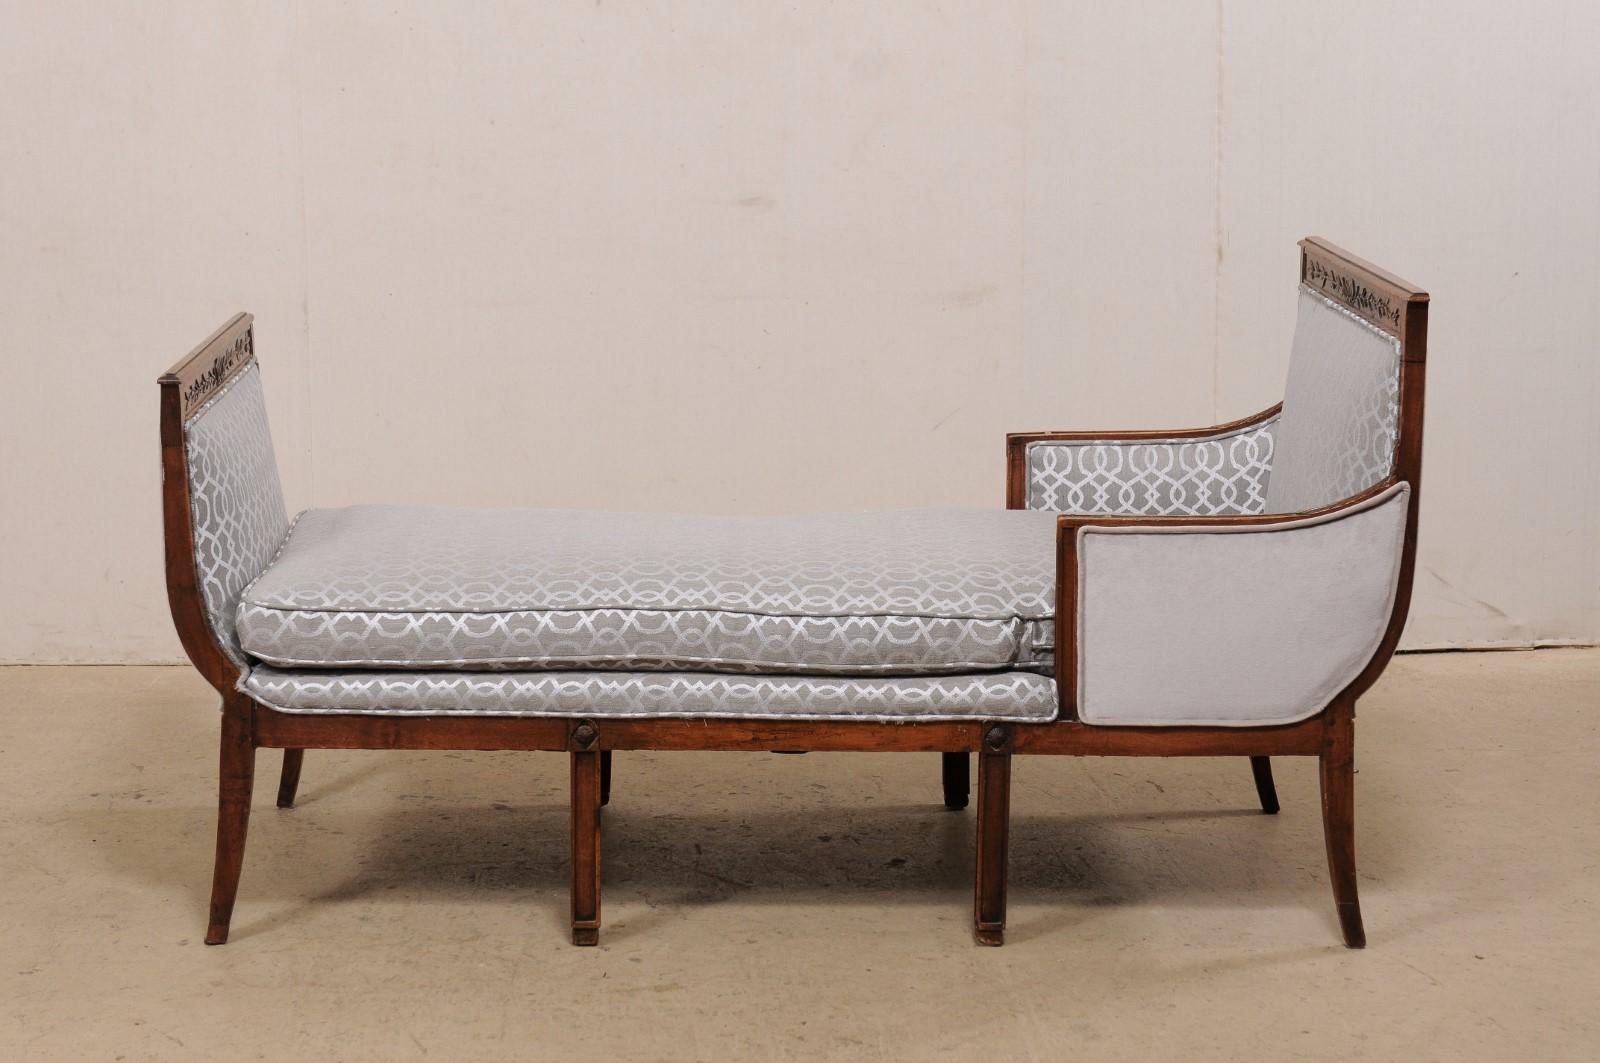 An Elegant French Duchesse en Bateau (Chaise) Newly Upholstered, 19th Century For Sale 5